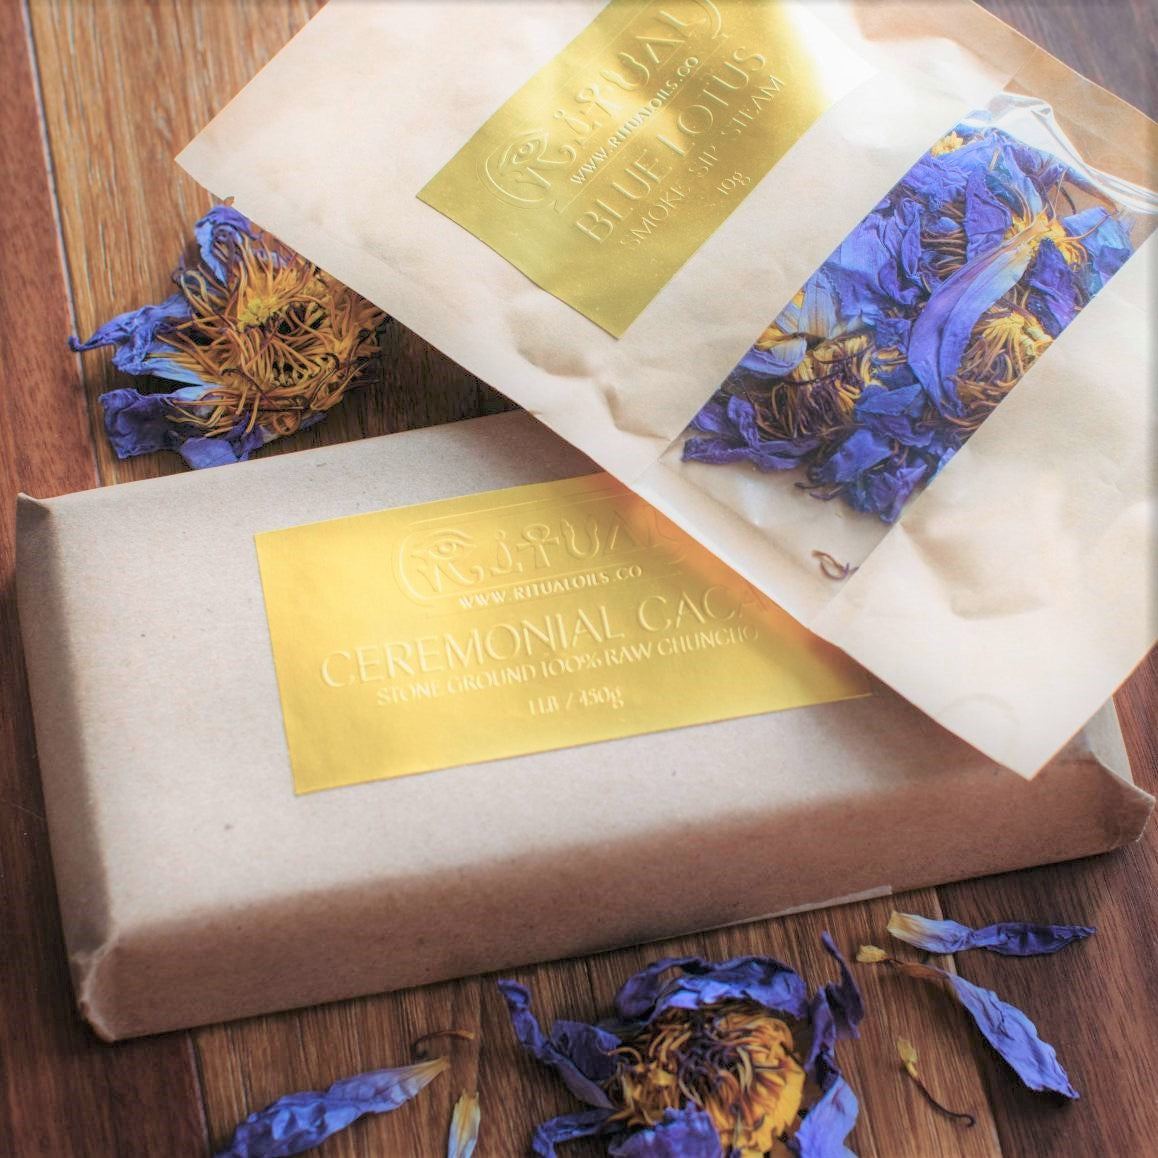 1 LB Ceremonial Cacao Block + 1 Pack of Blue Lotus Flowers